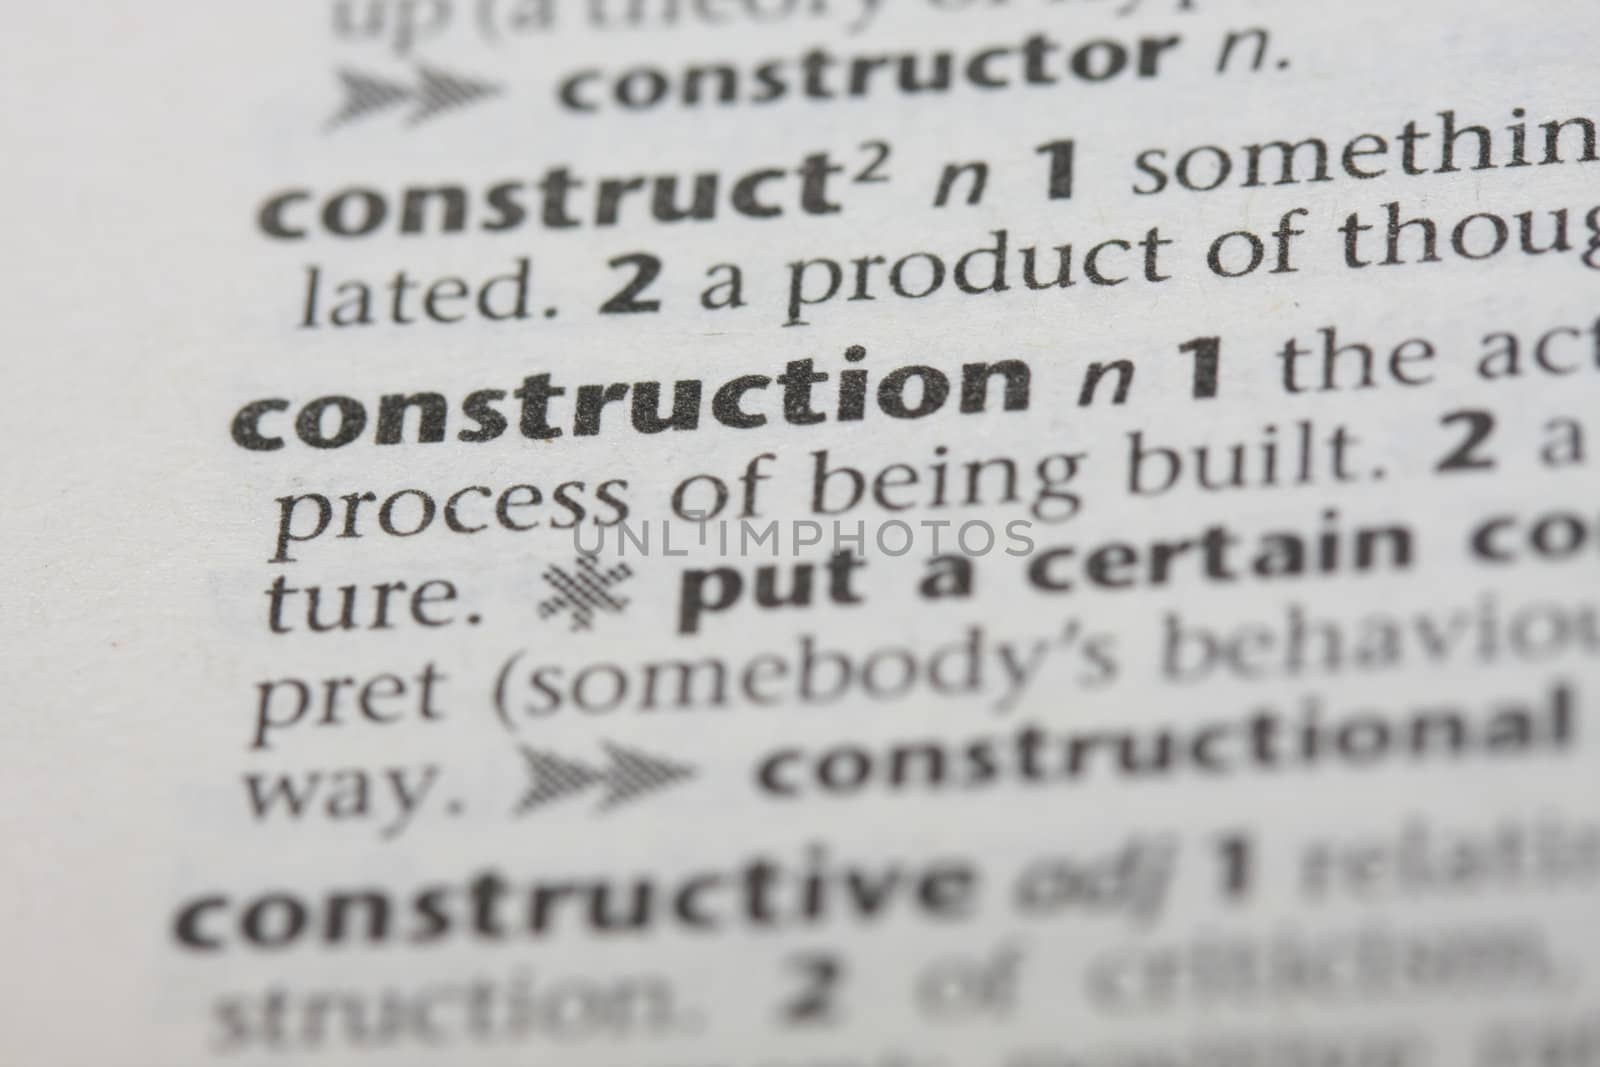 Construction work dictionary definition by TVR